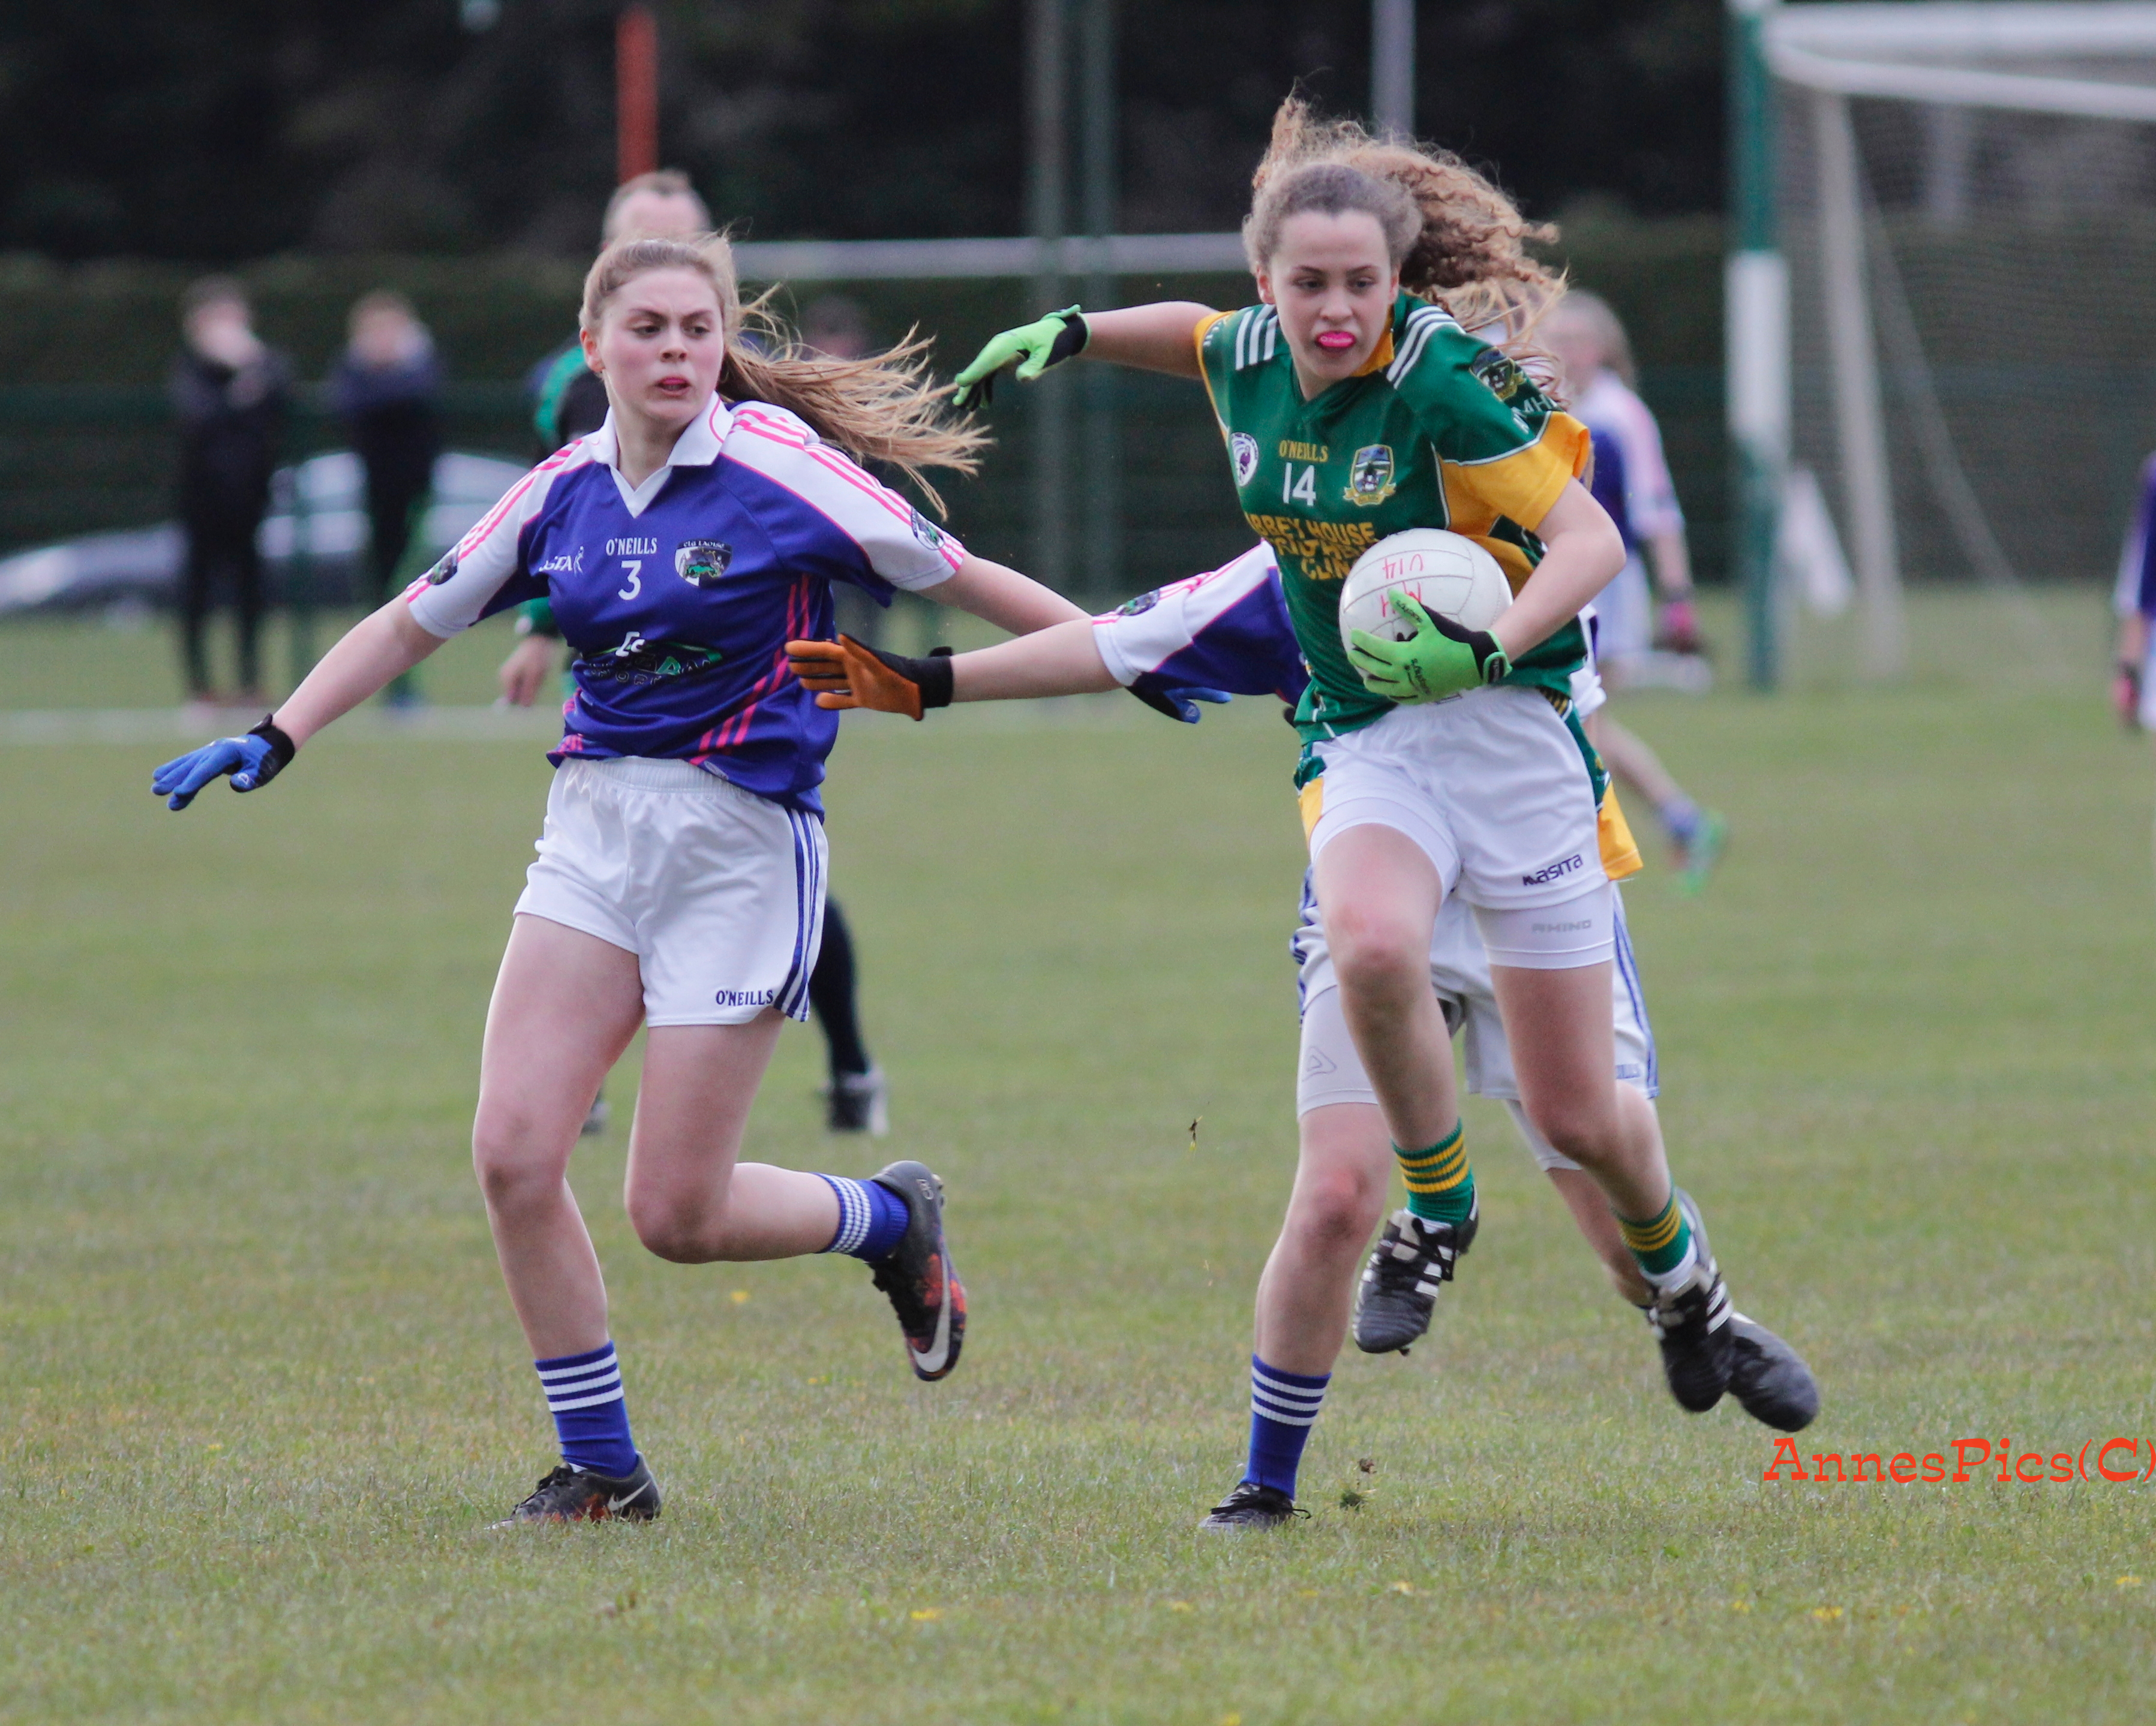 Action from the Leinster U14 Semi Final where Meath overcame Laois